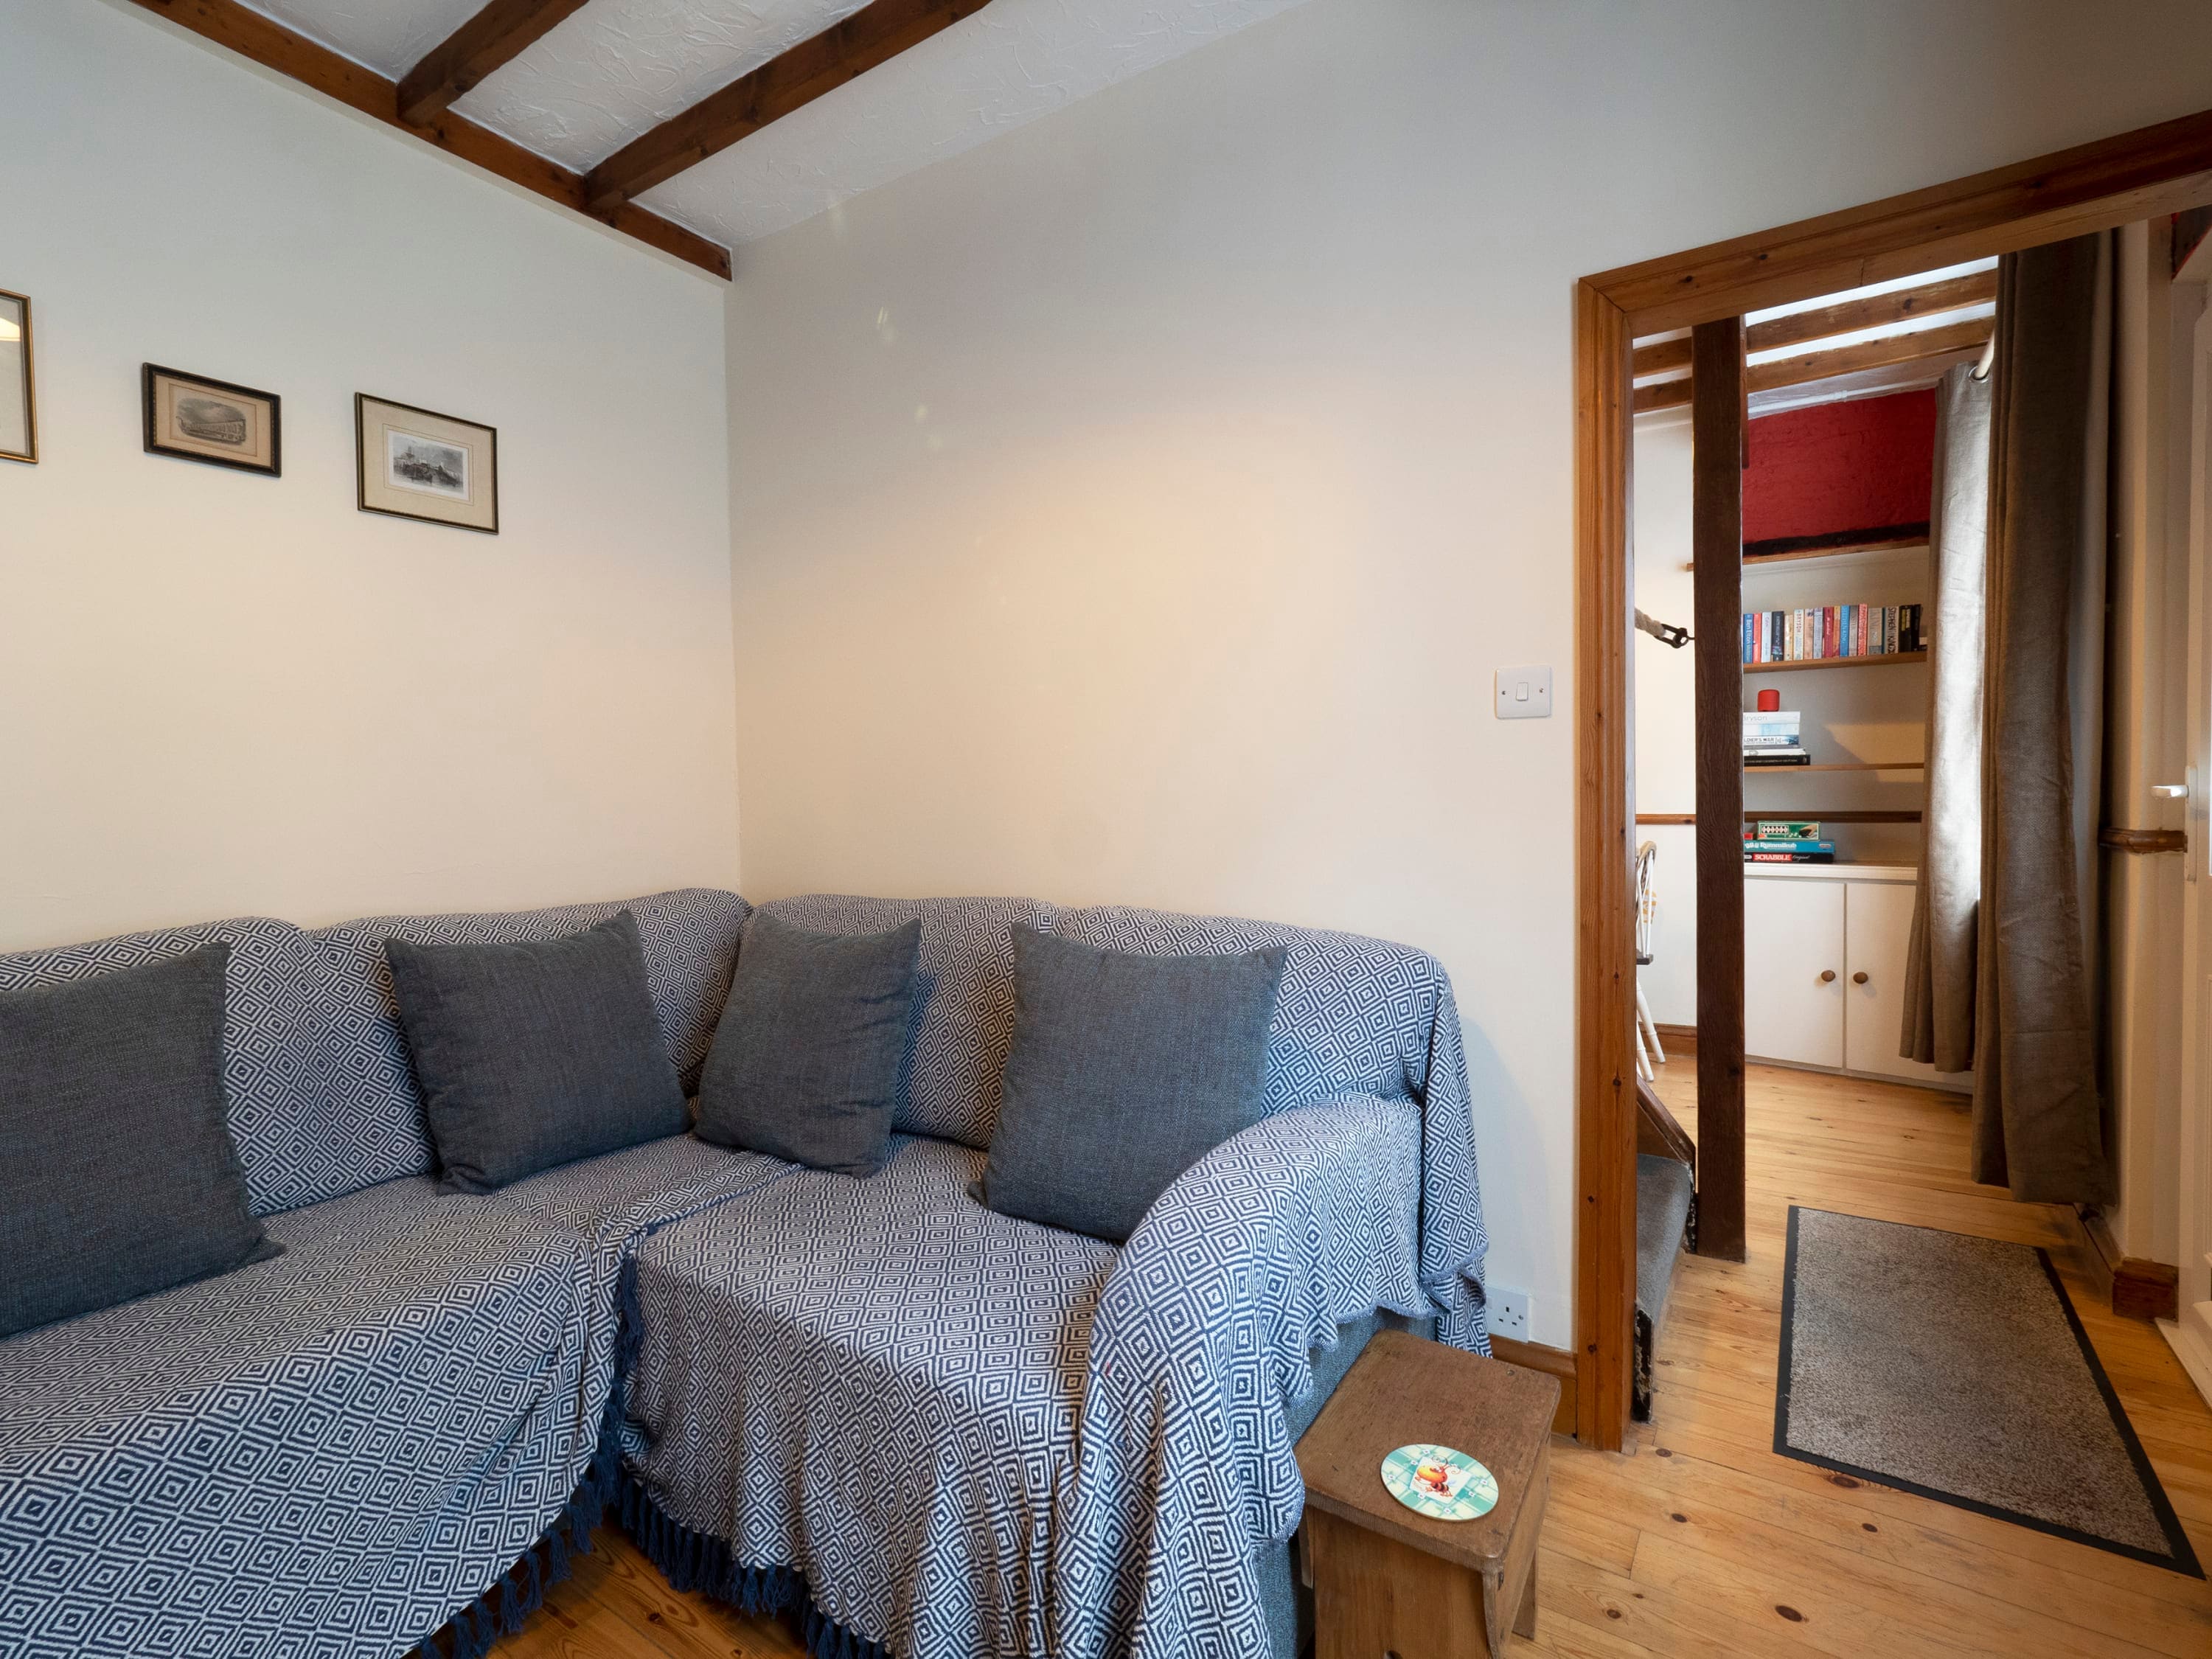 Property Image 2 - Ethelbert Cottage - Cosy seaside retreat in the heart of Broadstairs